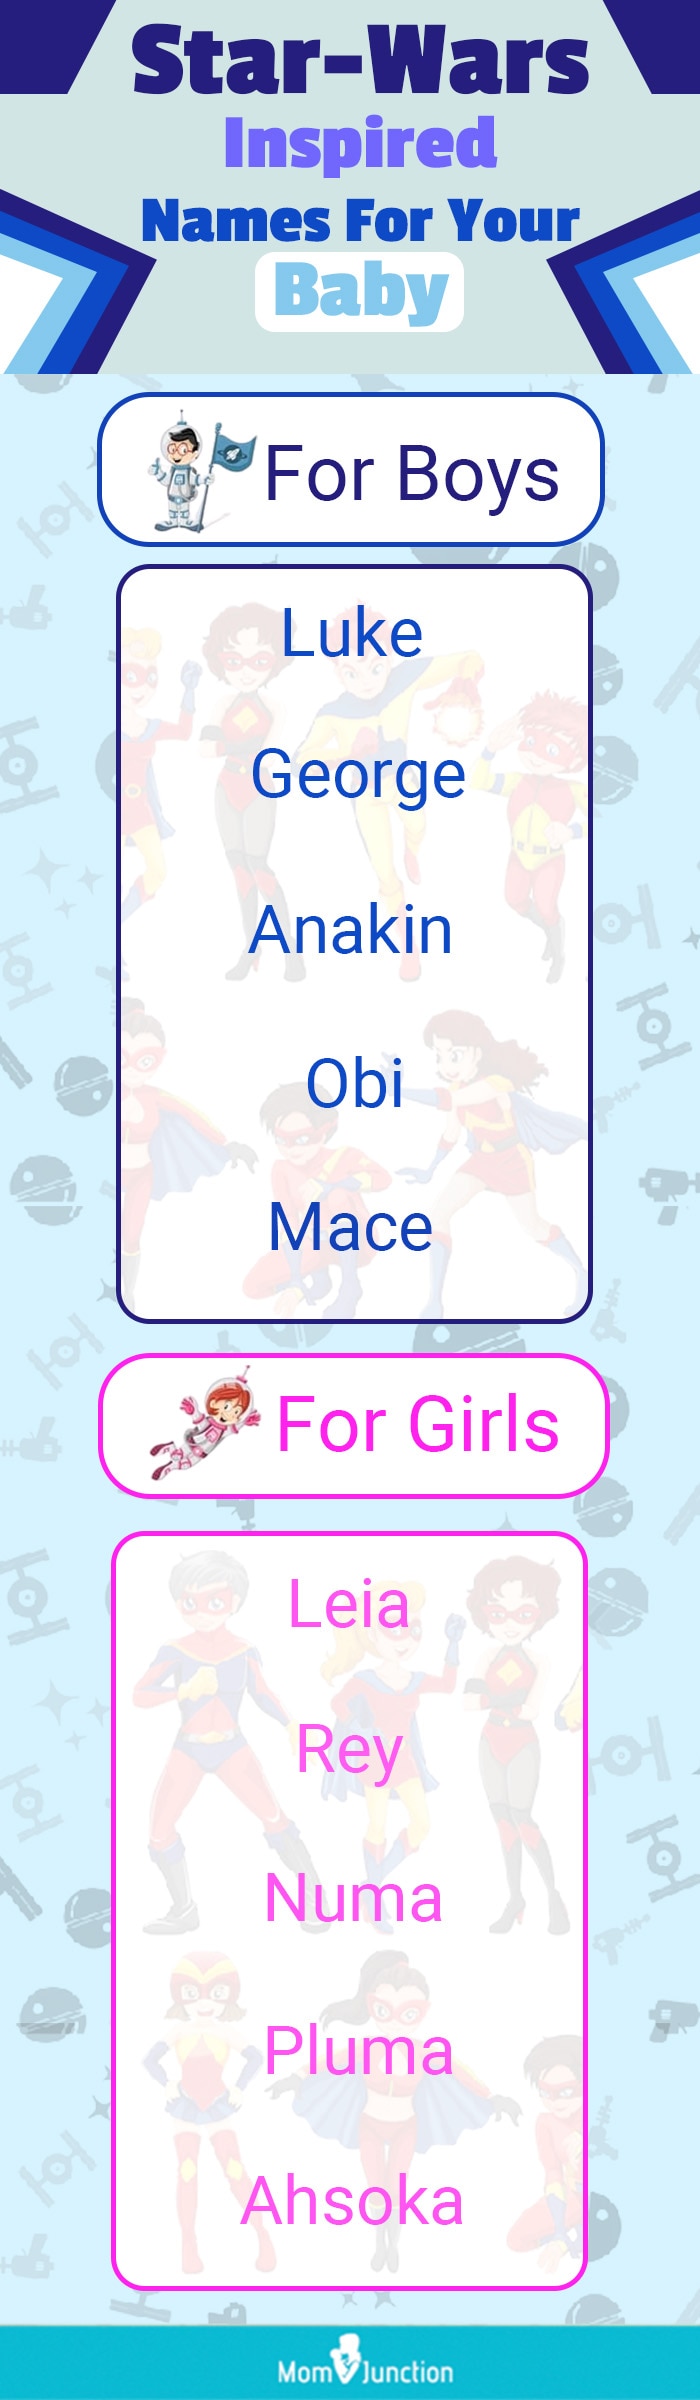 star-wars inspired names for your baby (infographic)